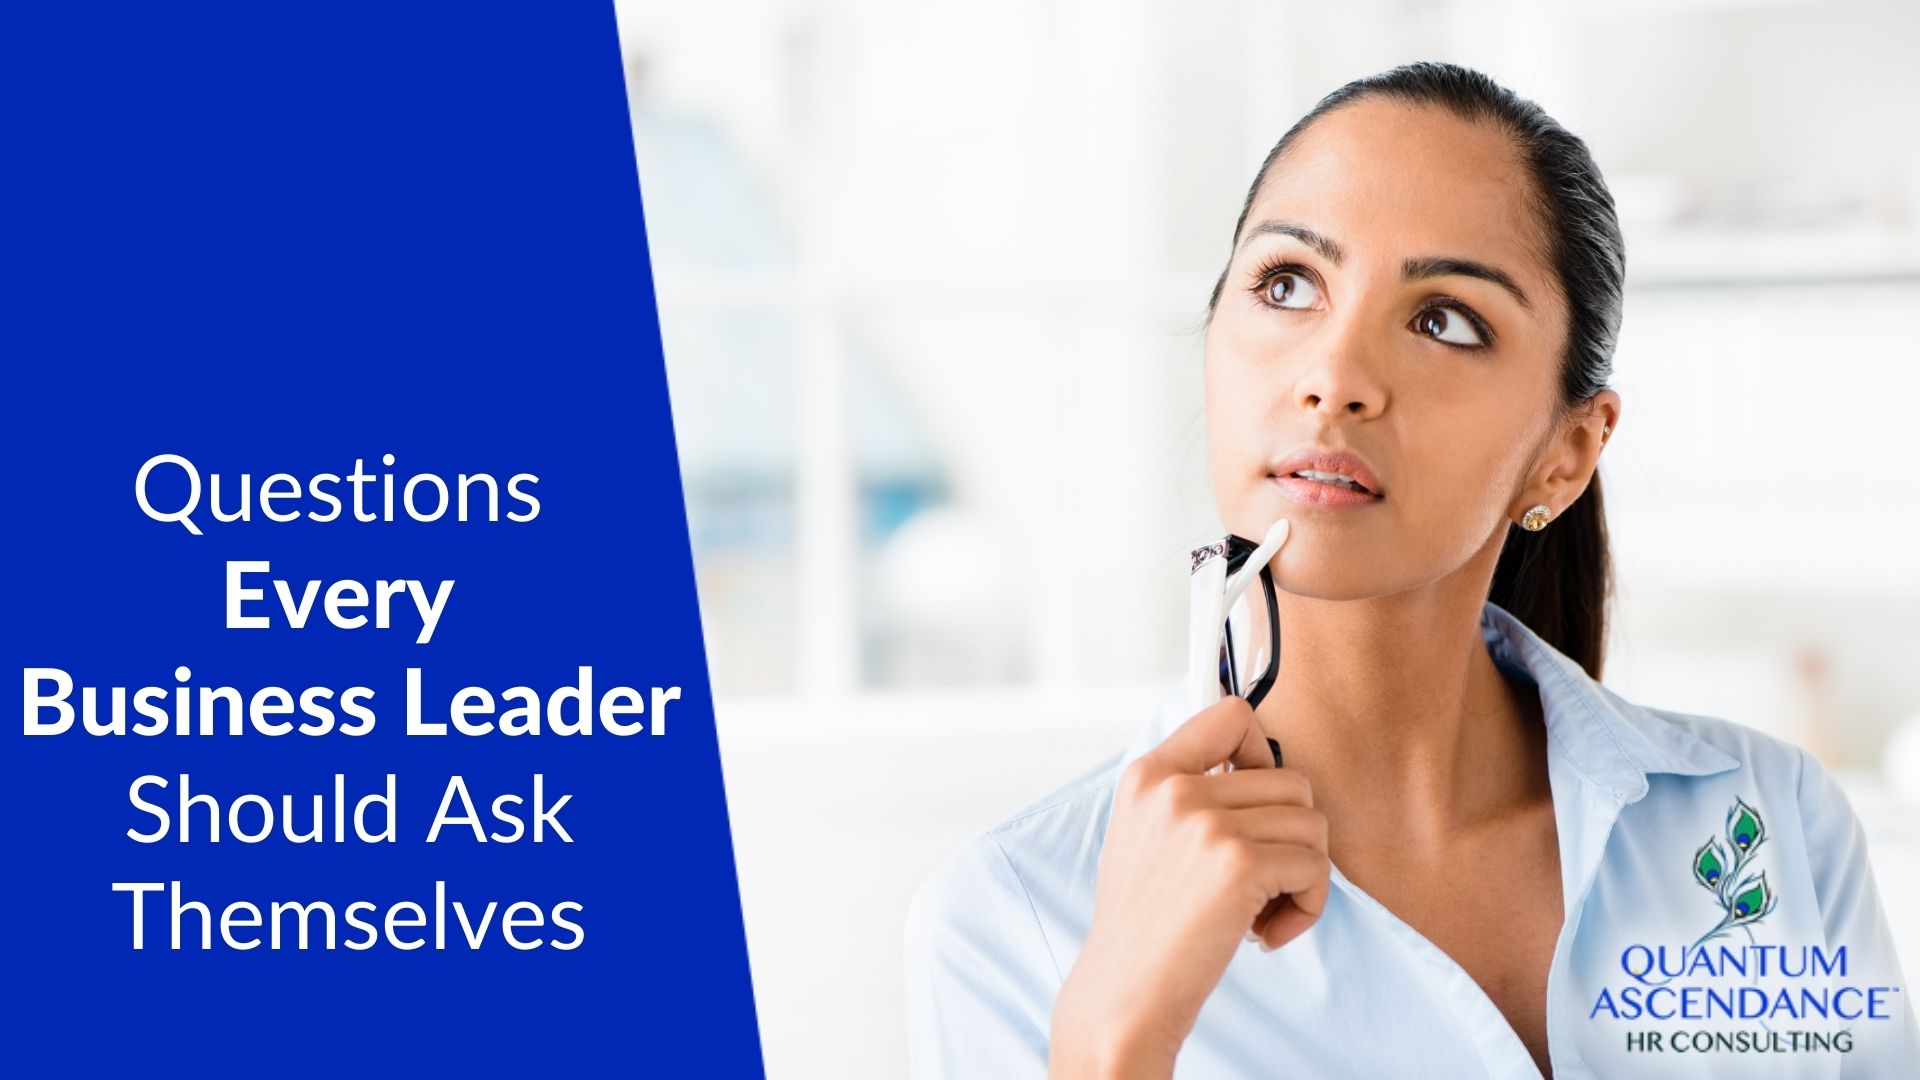 8 Questions Every Business Leader Should Ask Themselves